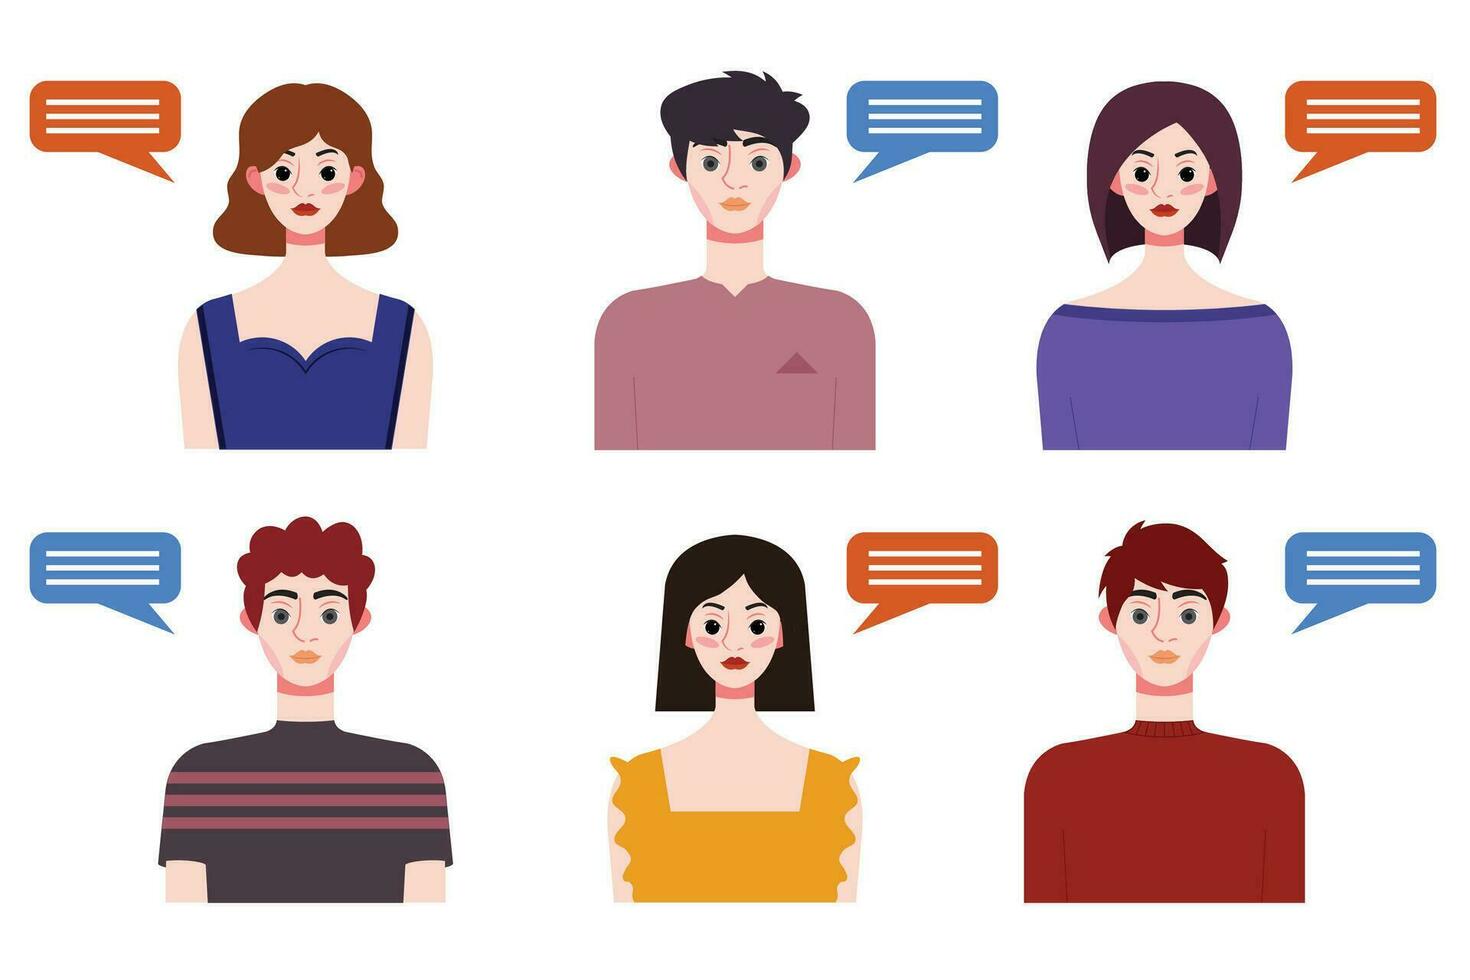 Set of young people avatars with speech bubbles. Vector illustration.